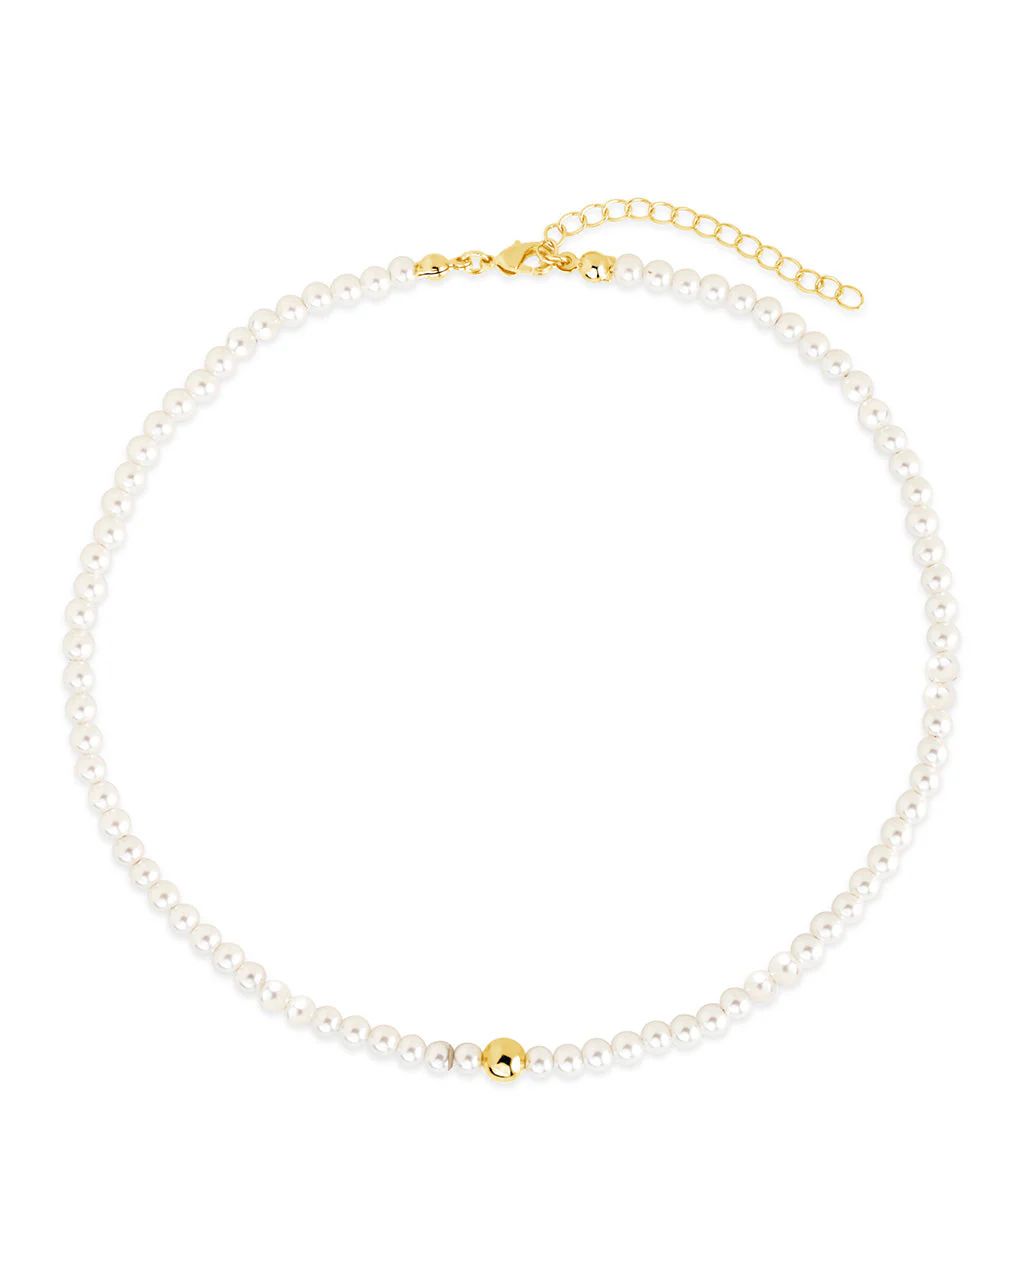 Dainty Pearl & Polished Bead Choker | Sterling Forever